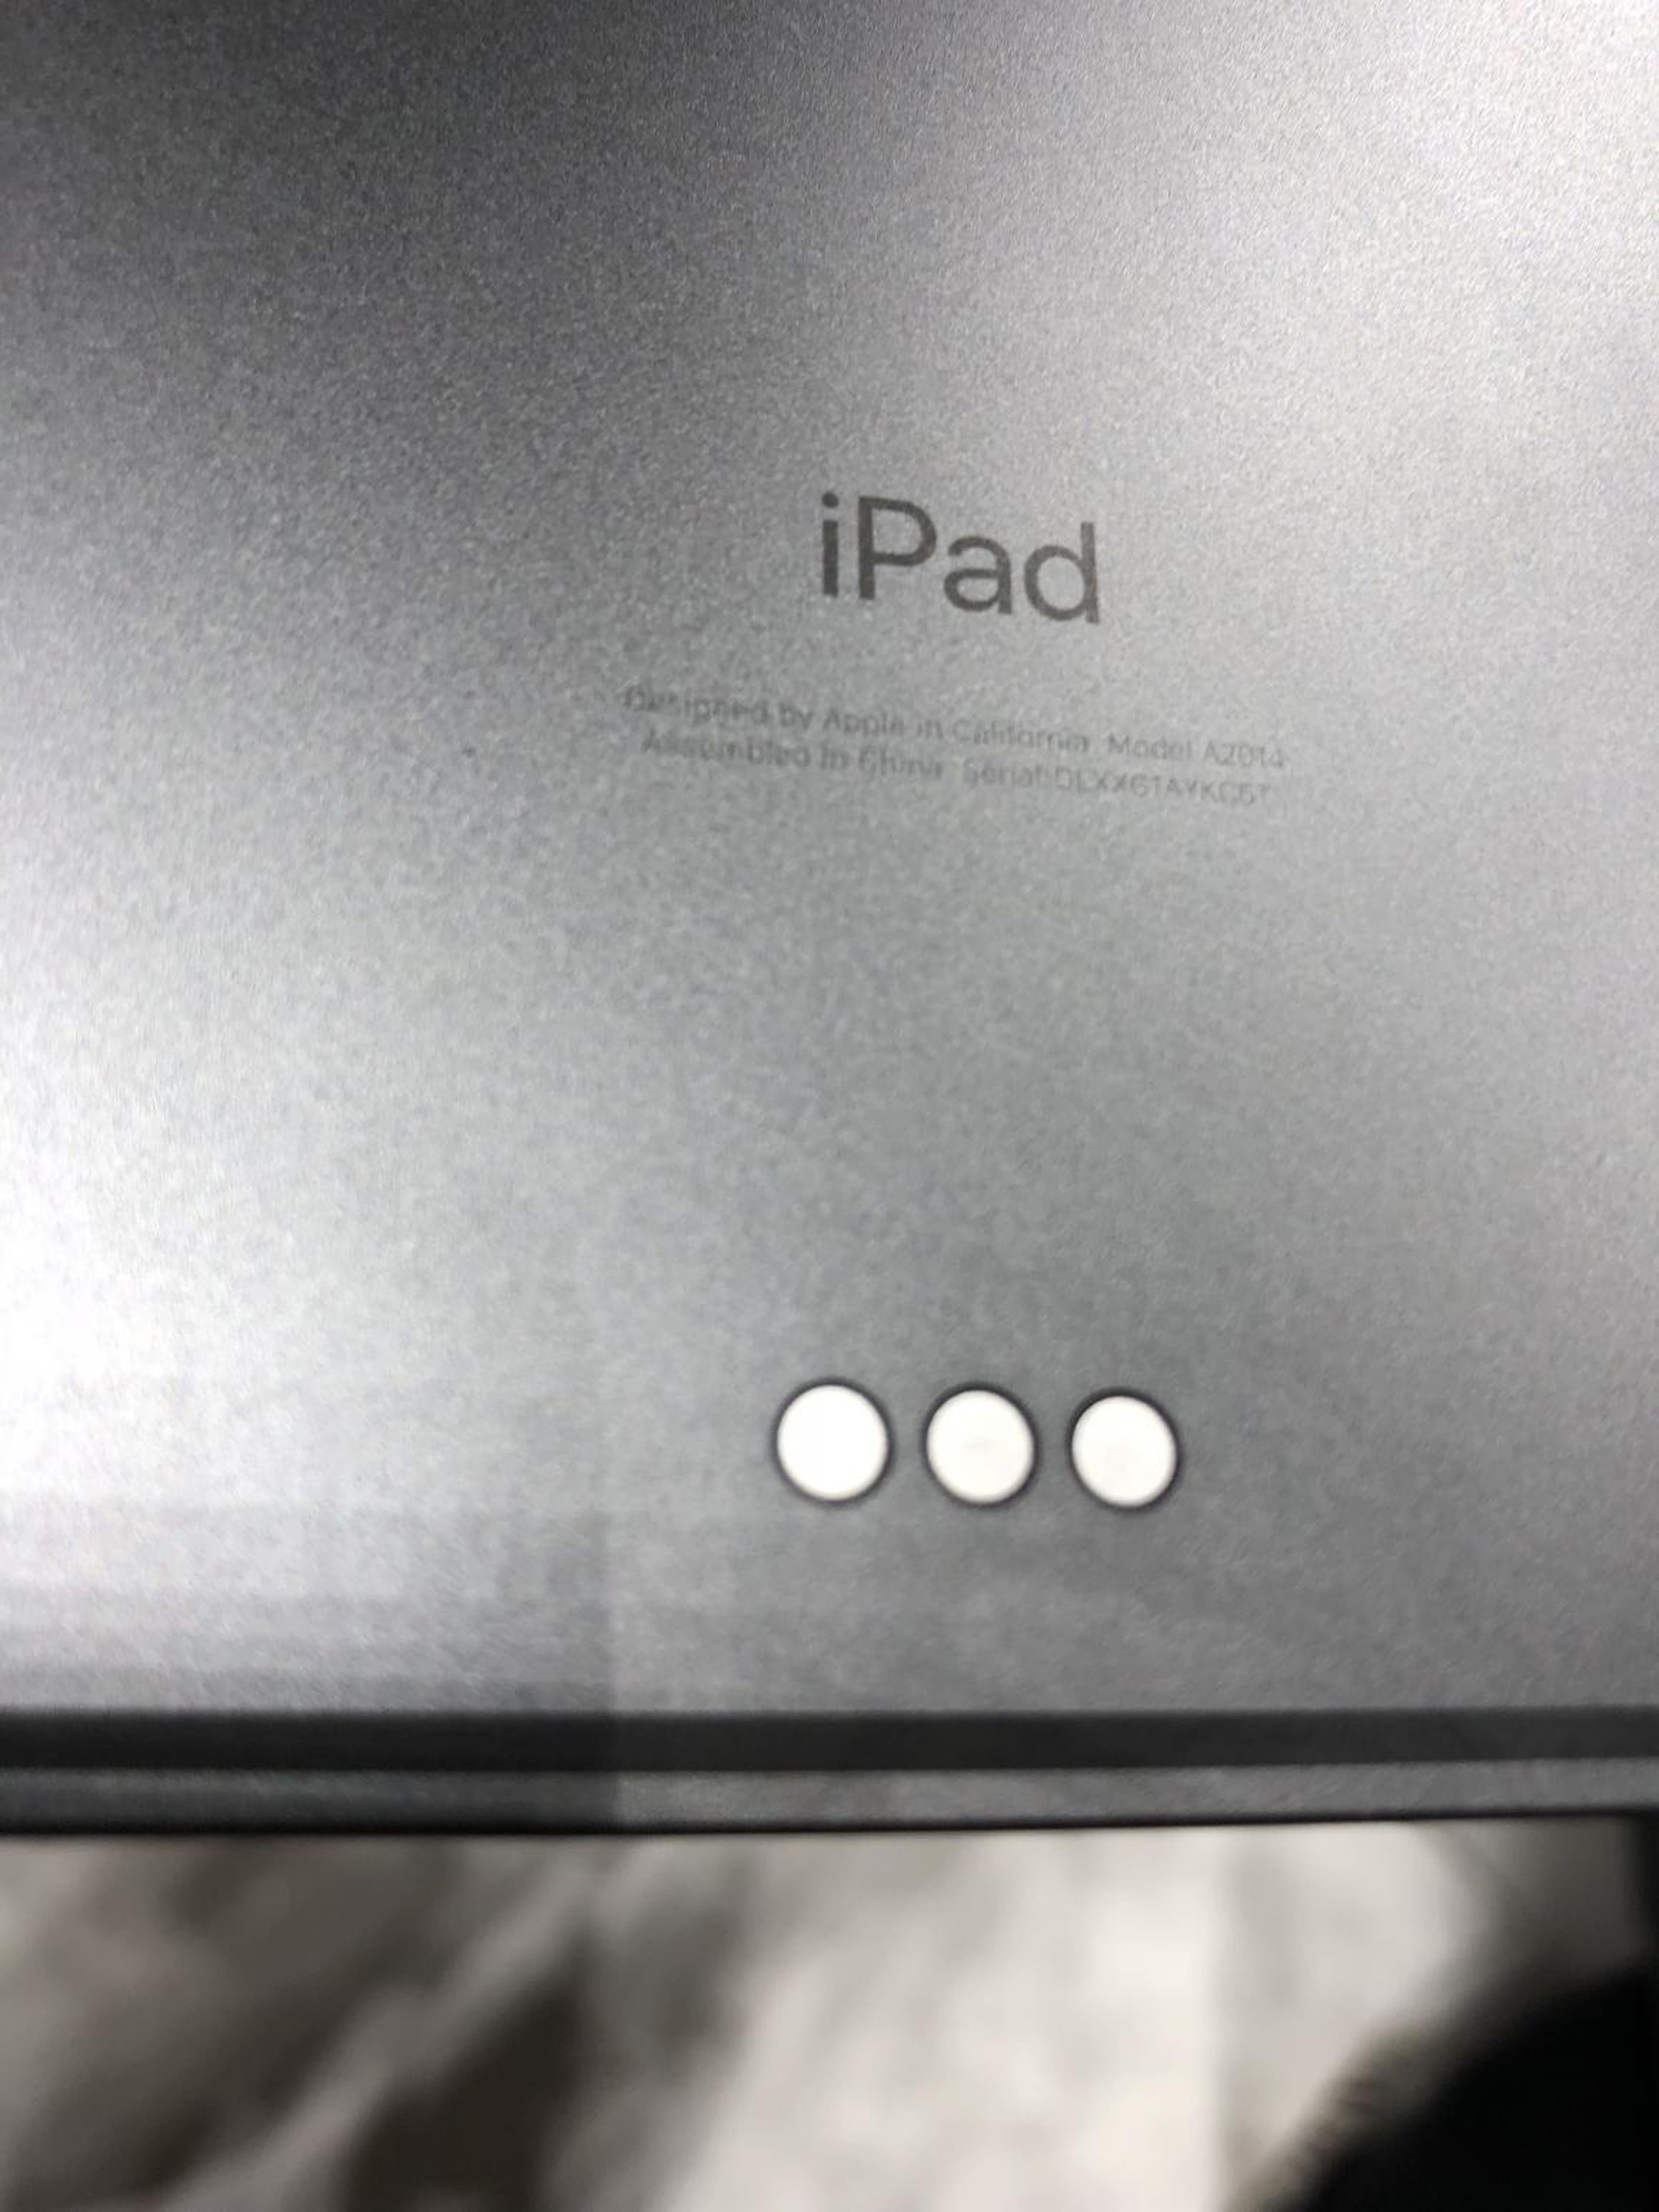 There's a "Smart Connector" at the bottom of the back when it's in portrait mode. The connector is used to hook up Apple's special keyboard for the iPad.